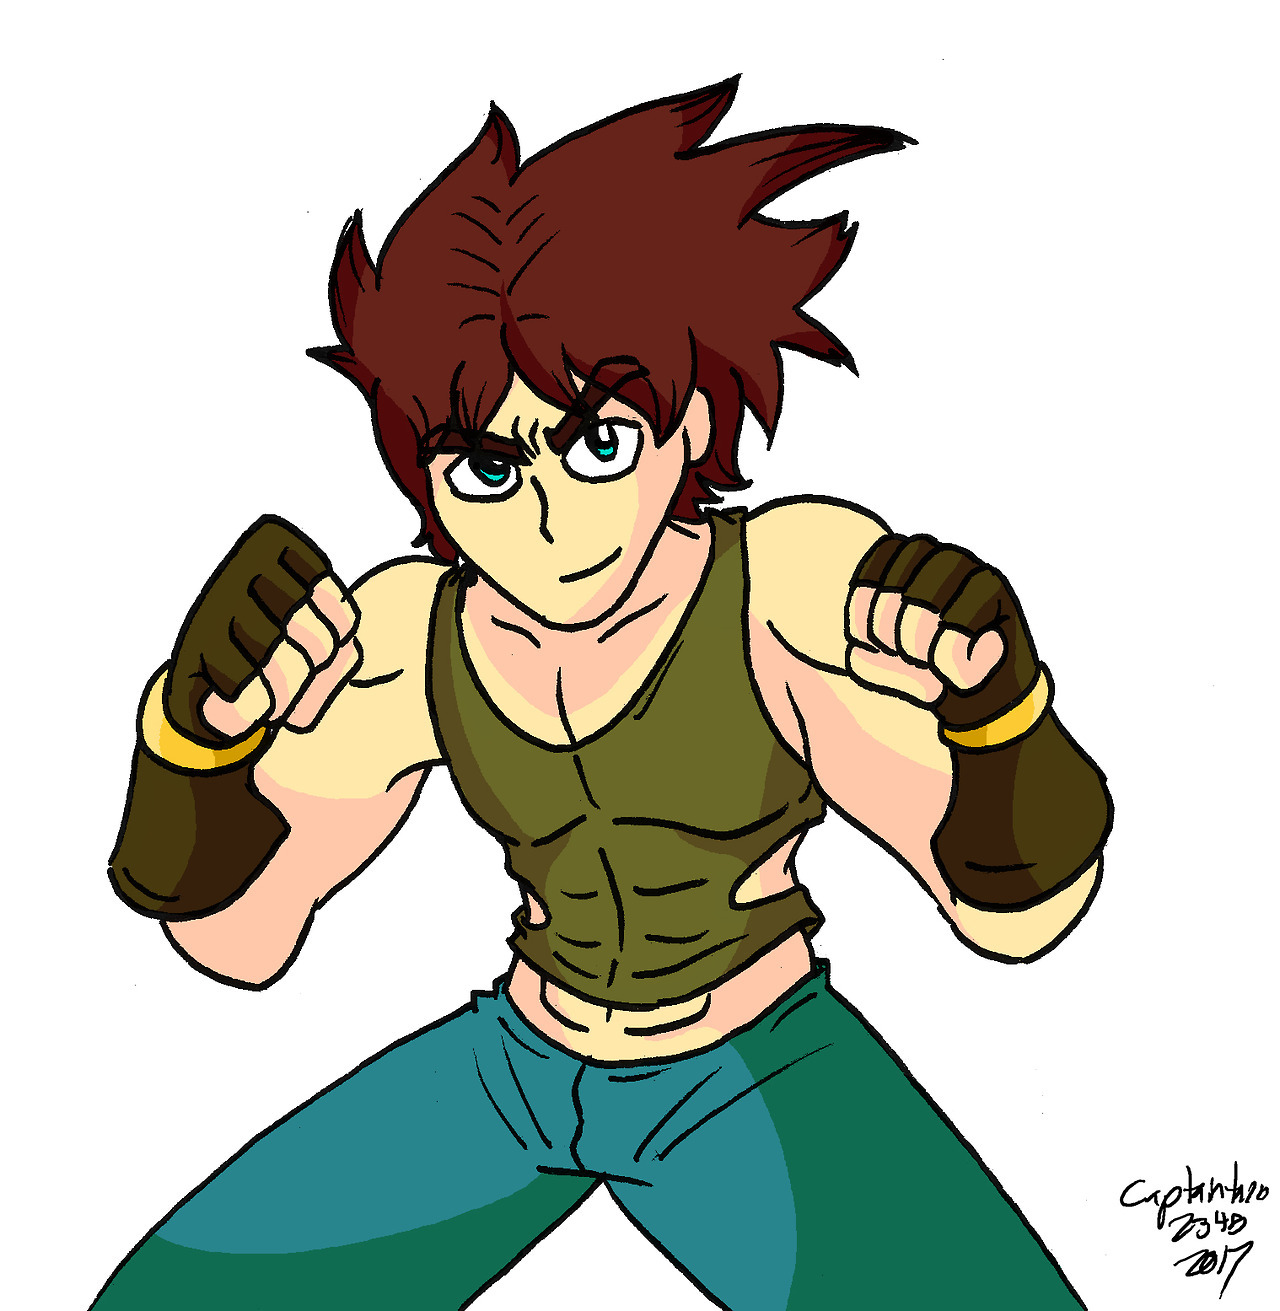 I wanted to try drawing a fighting pose, and who better to draw in a fighting pose